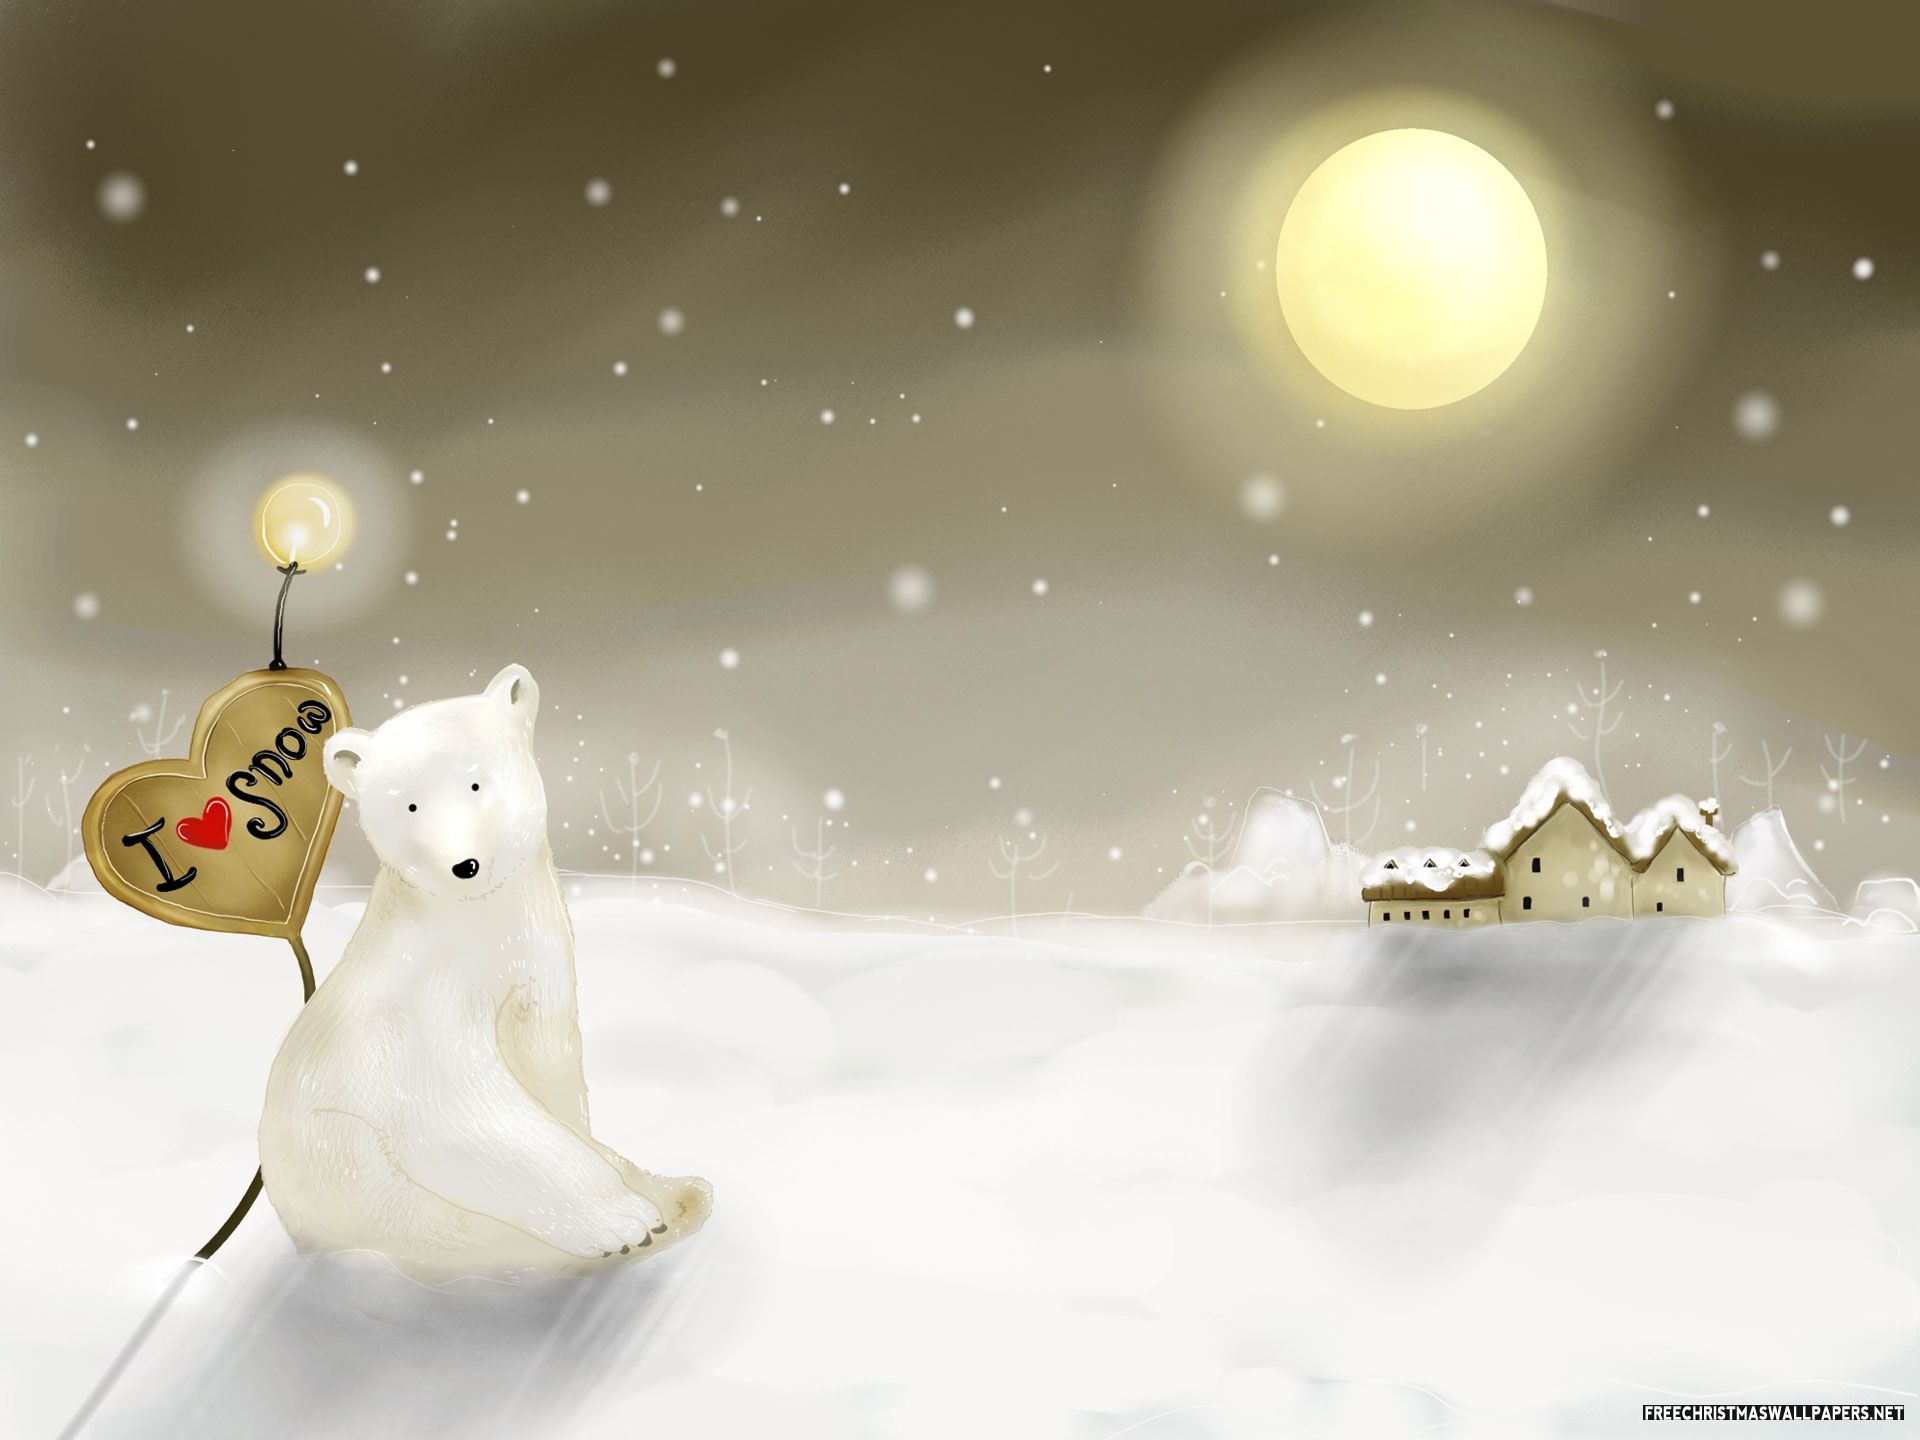 Christmas Village And Bear. Winter wallpaper, Christmas landscape, Christmas picture beautiful